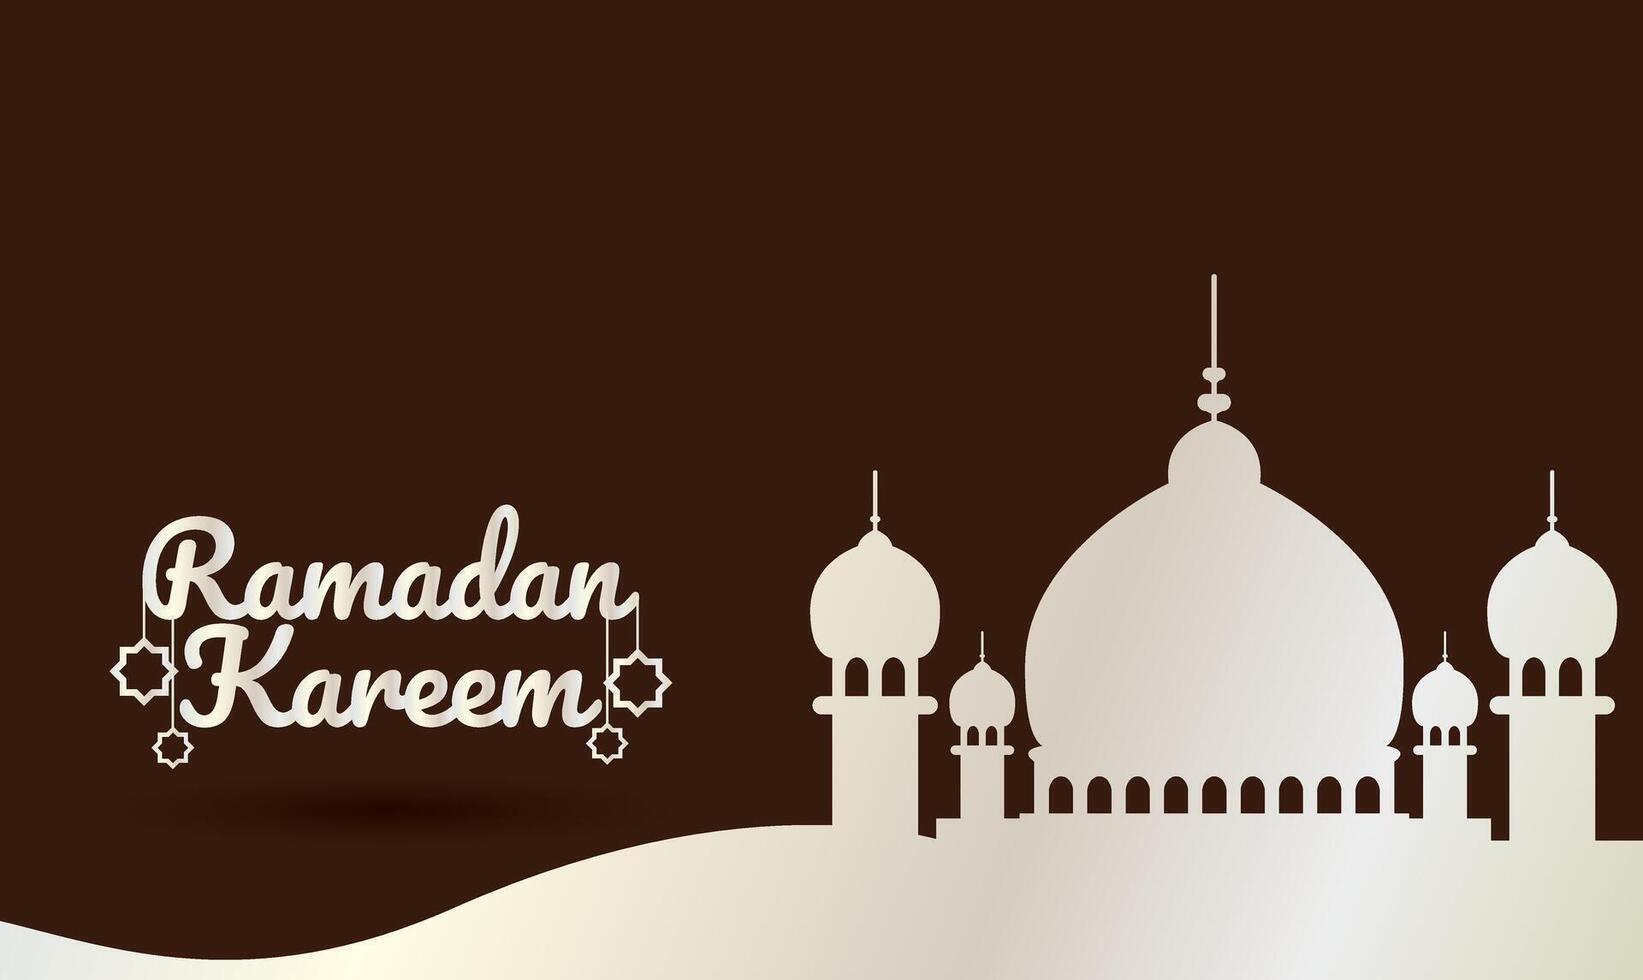 Ramadan Kareem background with mosque in white vector